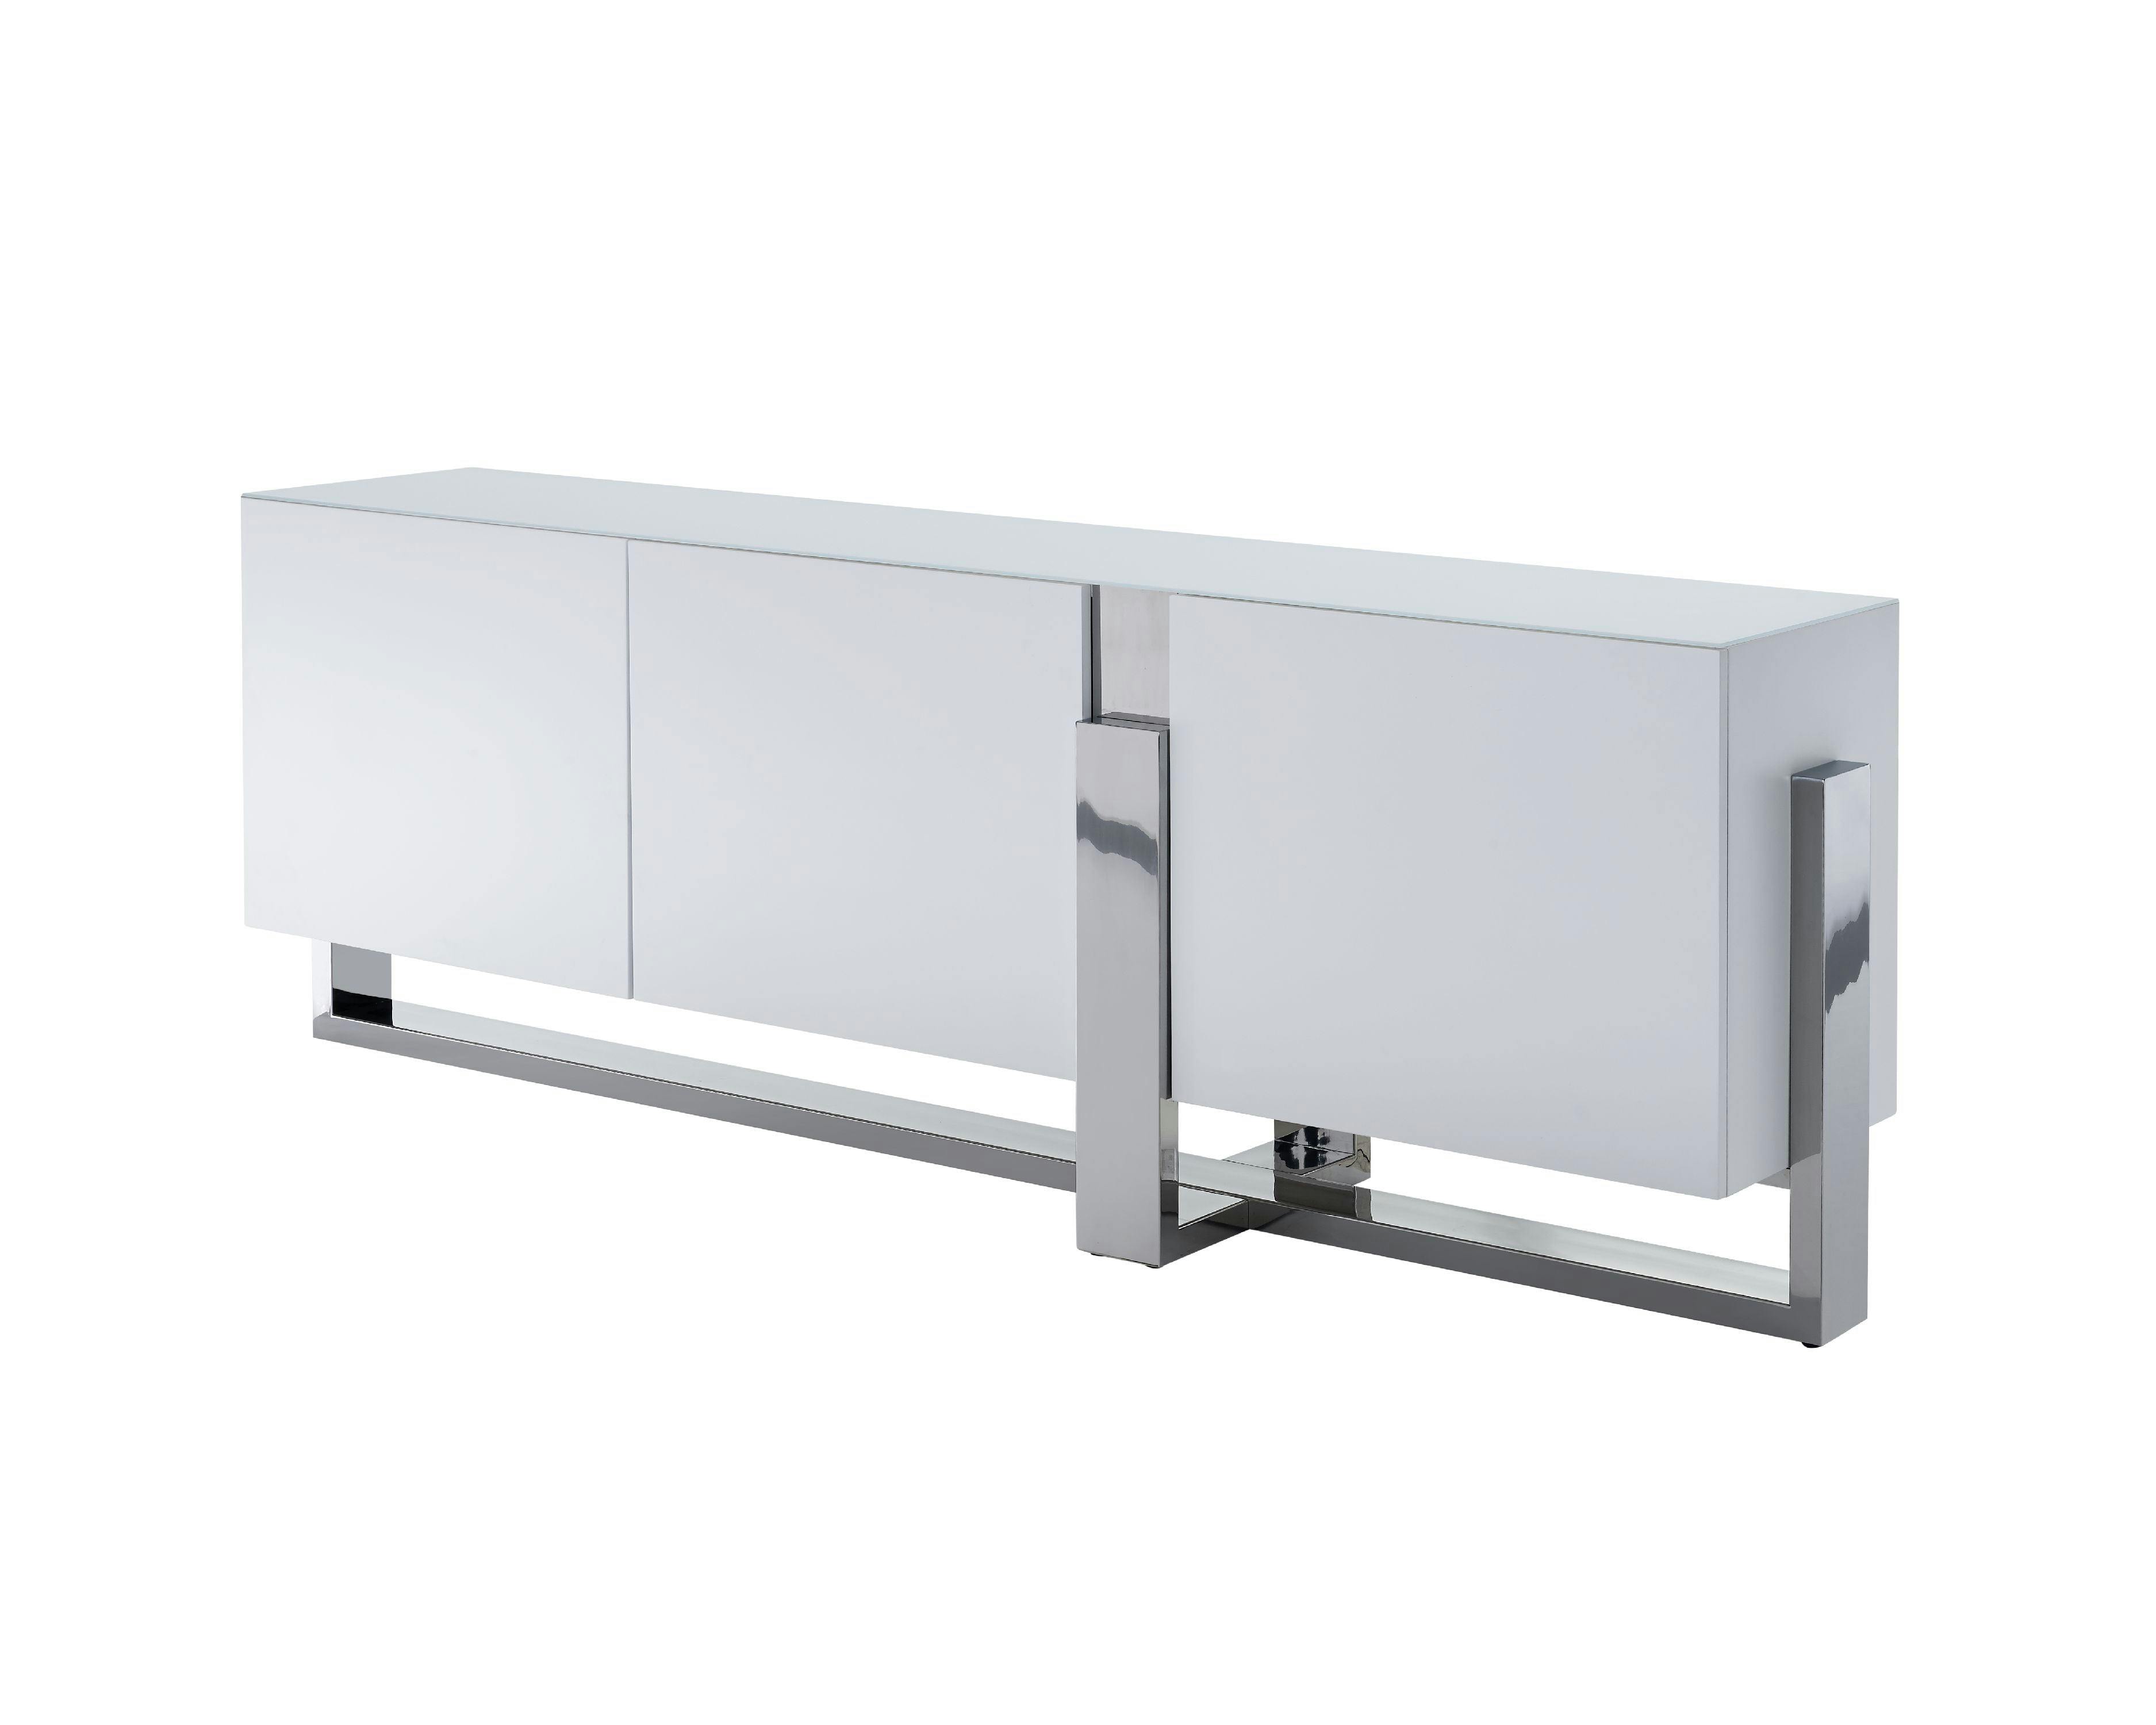 Blake Contemporary High Gloss White Lacquer and Stainless Steel Buffet